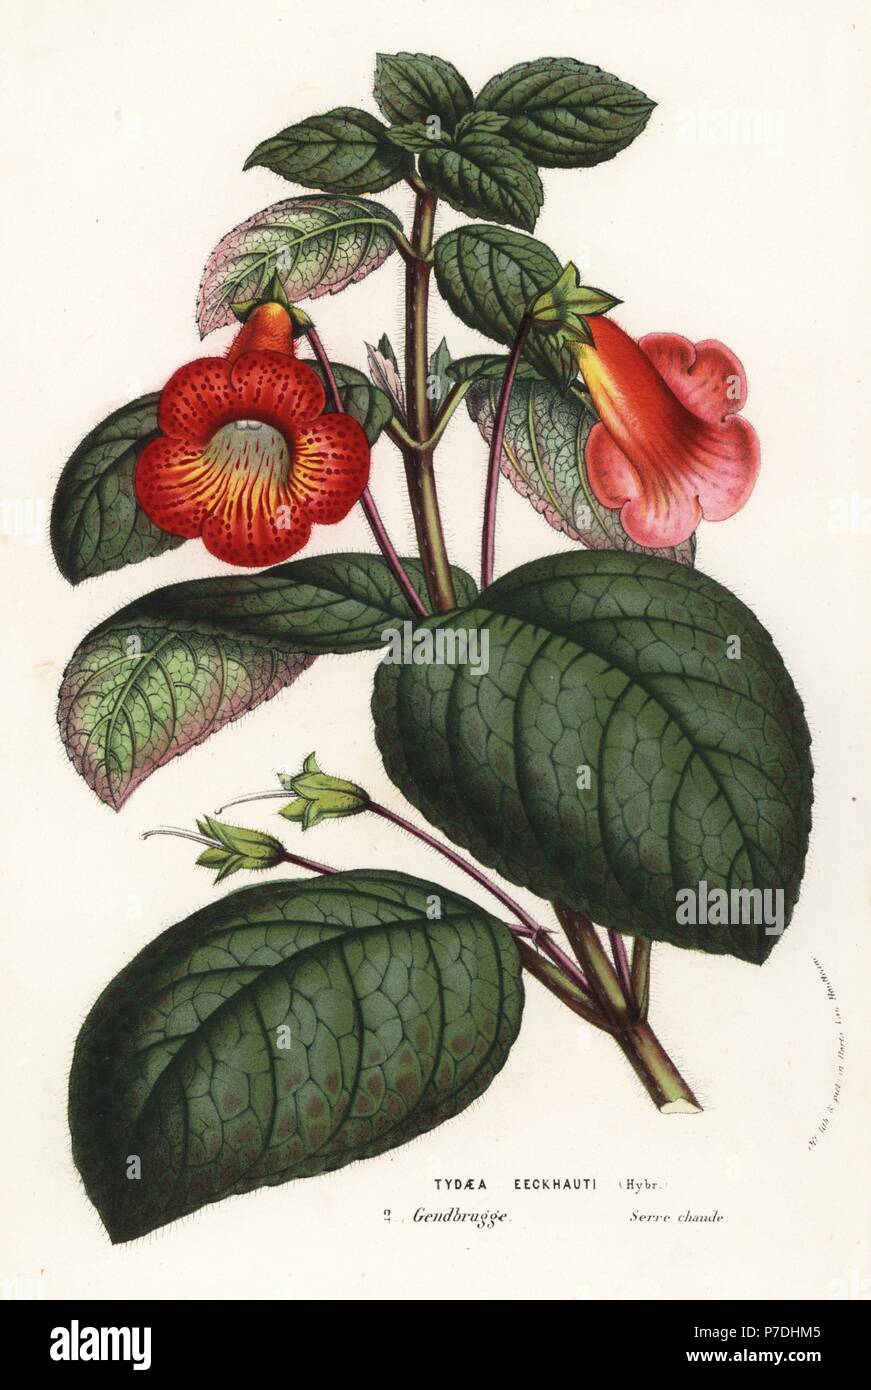 Kohleria eeckhauti hybrid (Tydaea eeckhauti). Handcoloured lithograph from Louis van Houtte and Charles Lemaire's Flowers of the Gardens and Hothouses of Europe, Flore des Serres et des Jardins de l'Europe, Ghent, Belgium, 1857. Stock Photo